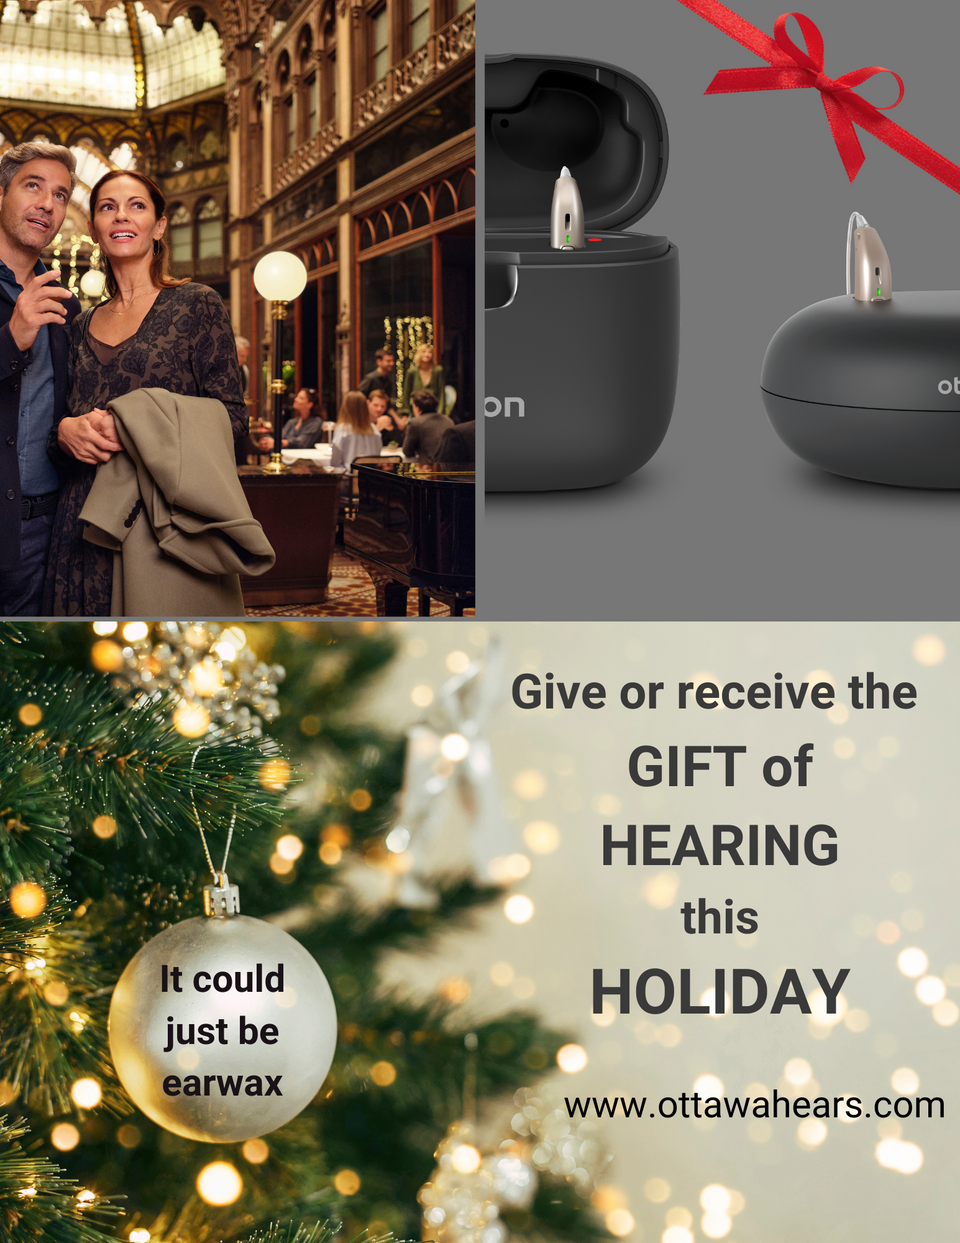 Give or receive the GIFT of HEARING